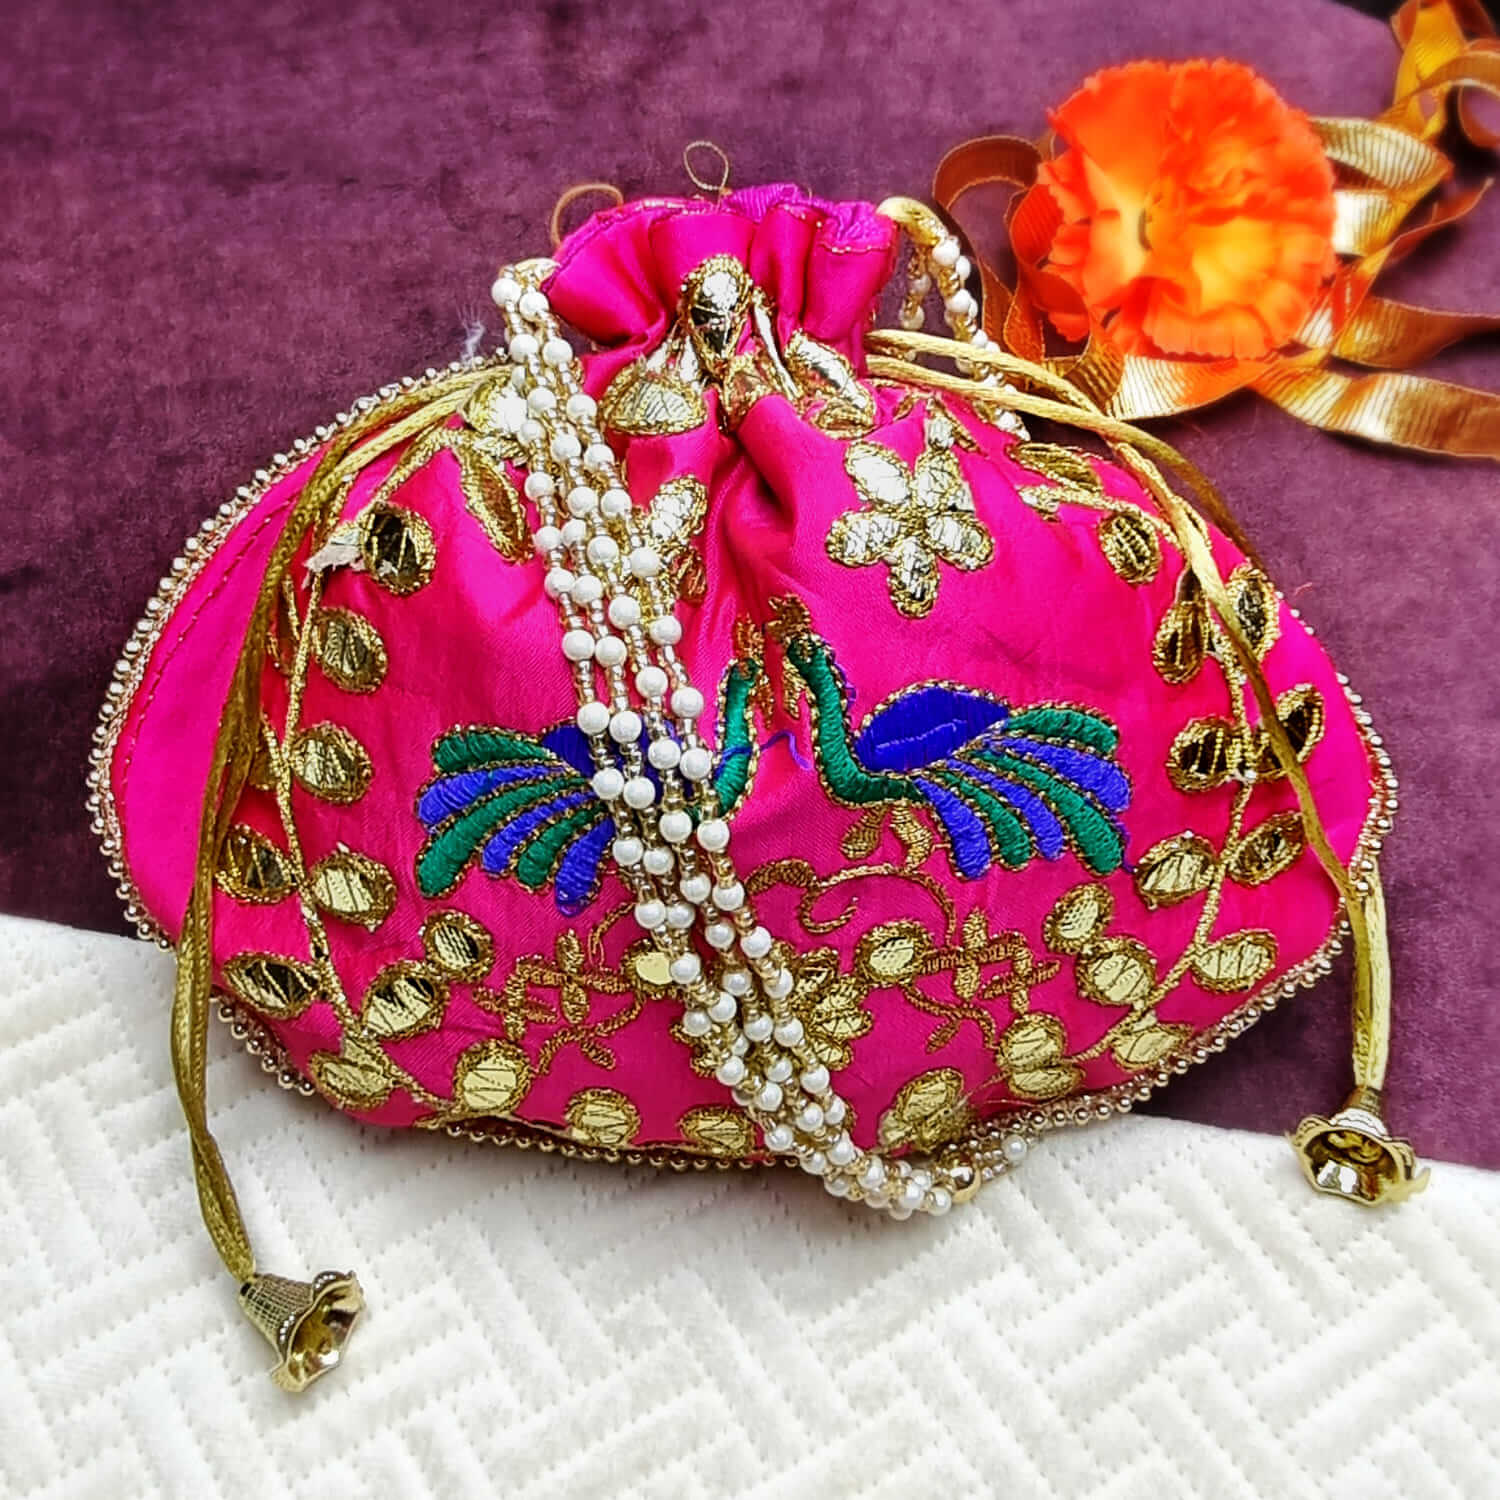 Hand Painted Tote Canvas and Jute Peacock Feather Bag Viridian Glamourous  Purse Painted Handbag Canvas Pocket Three Feathers Royal Bird - Etsy |  Painted handbag, Painted bags, Painted tote